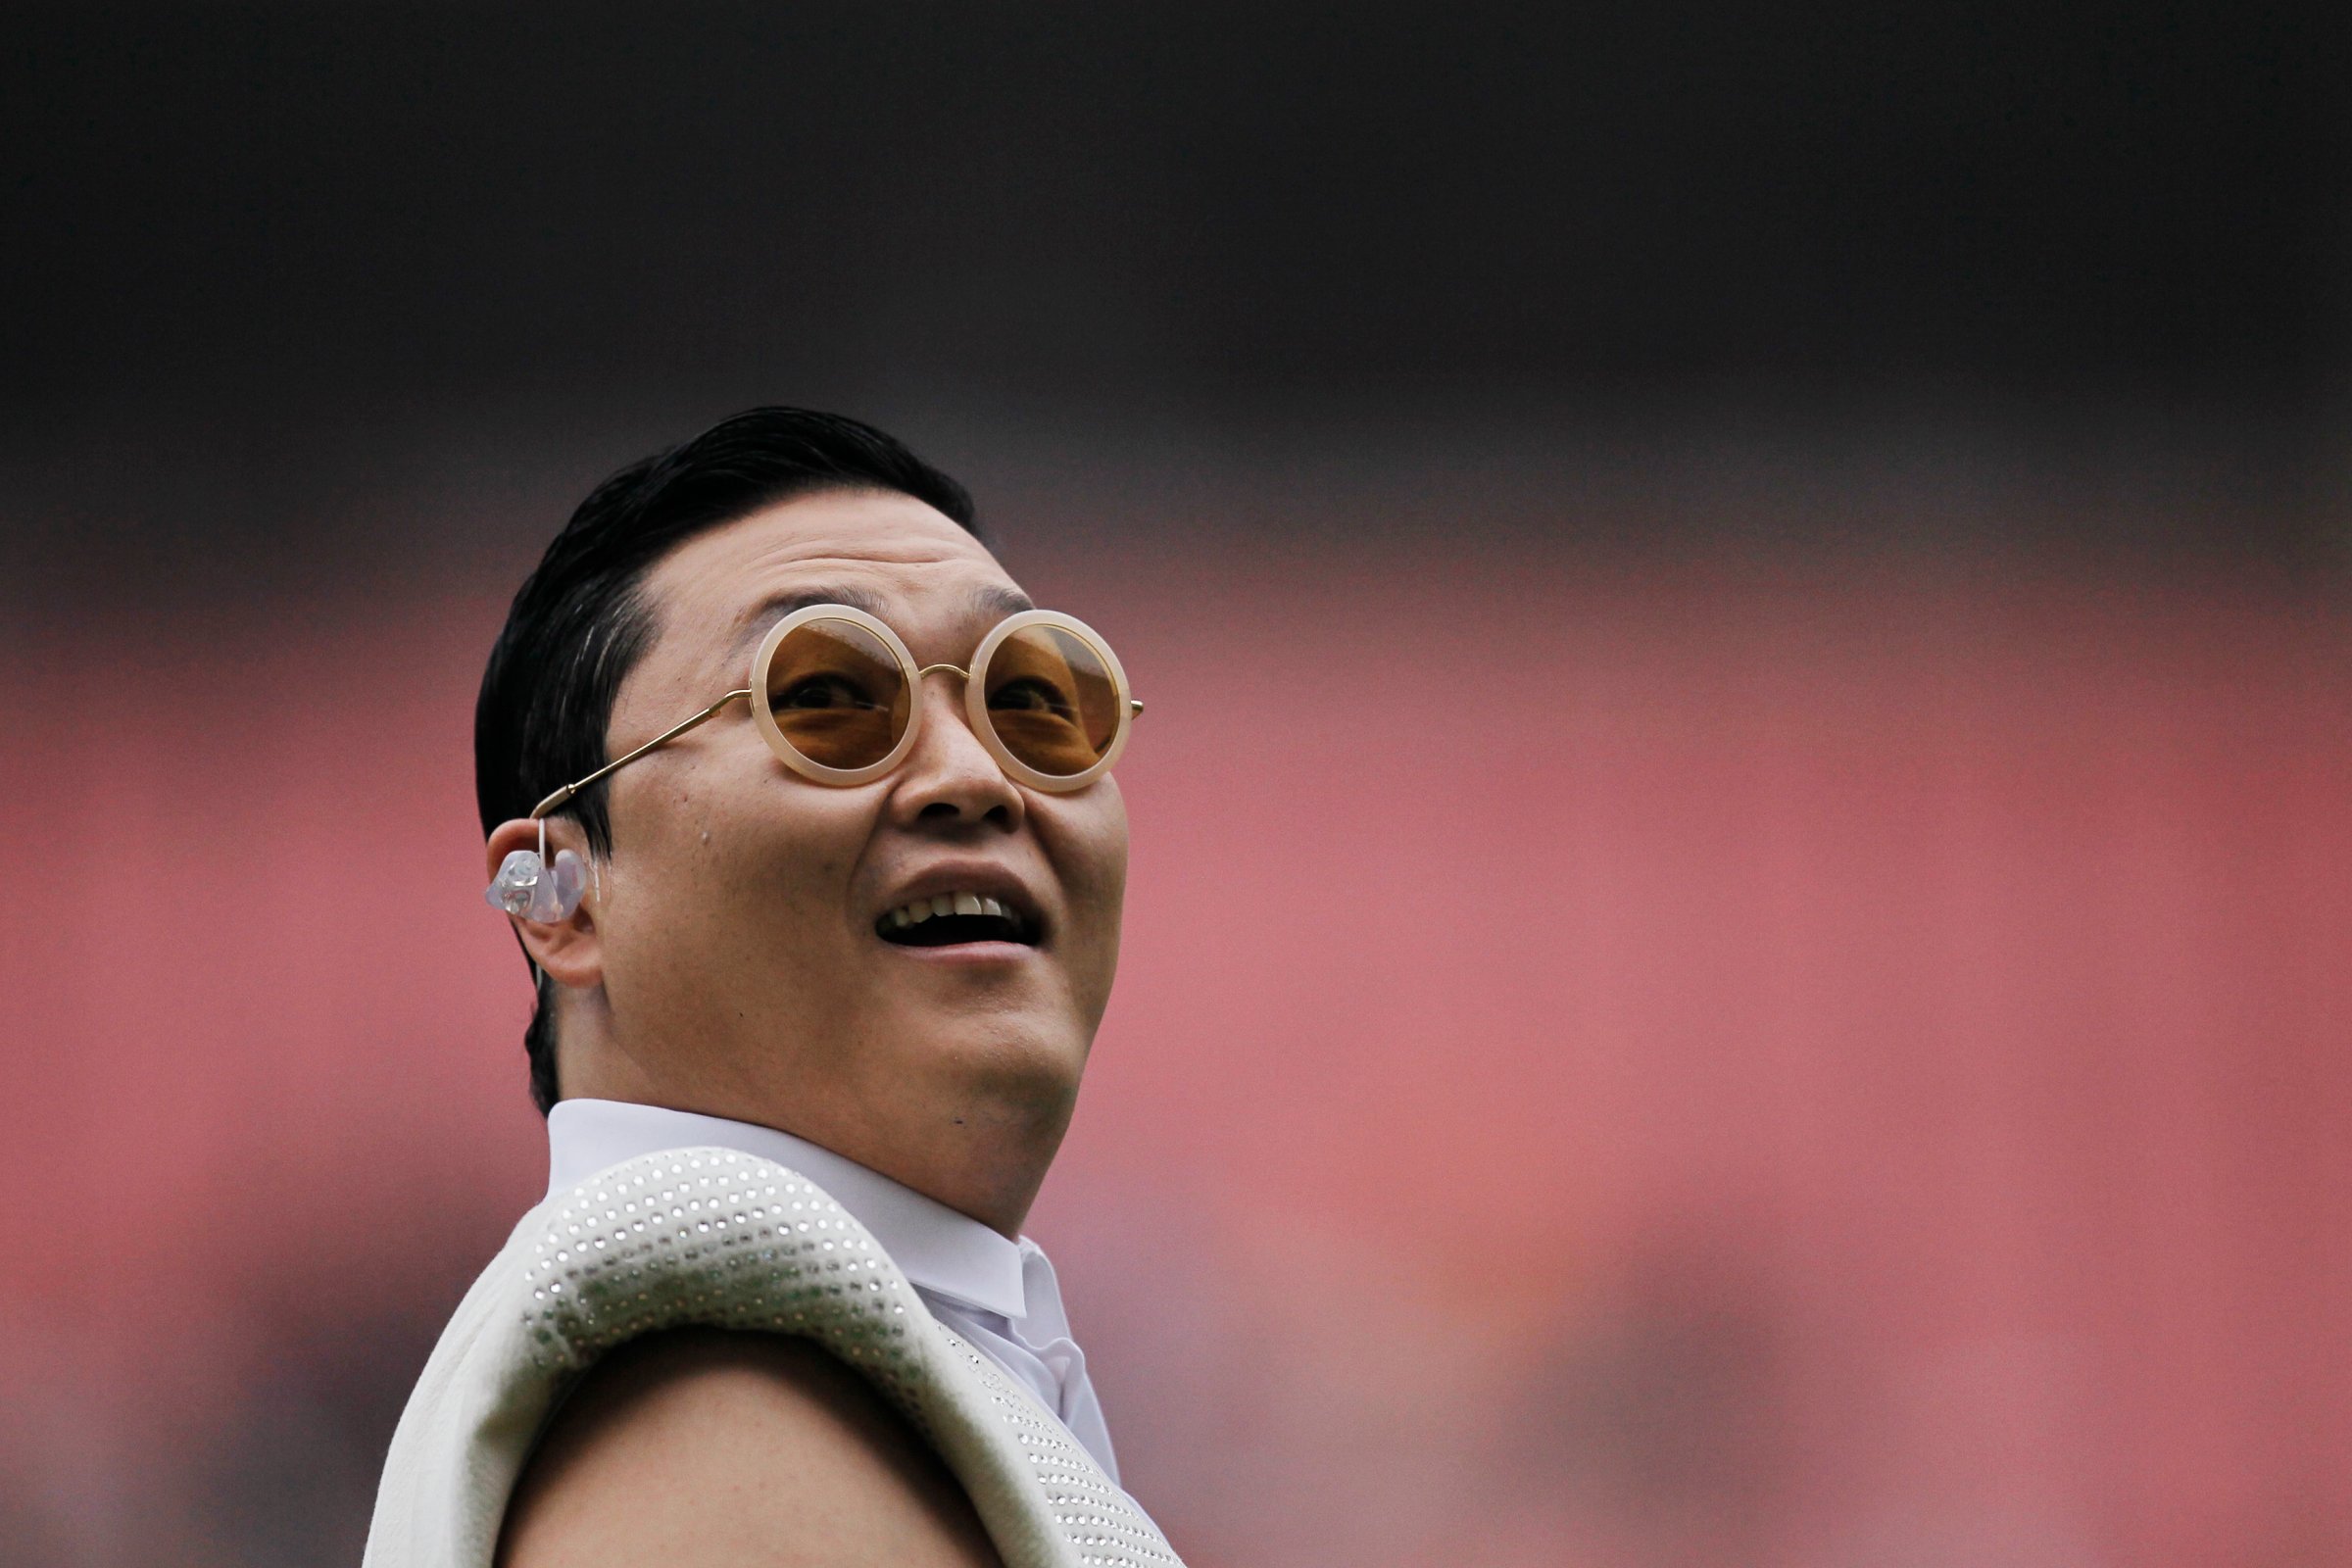 South Korean singer Psy performs during a charity soccer match between the Park Ji-sung and Friends team and Shanghai Laokele Stars in Shanghai